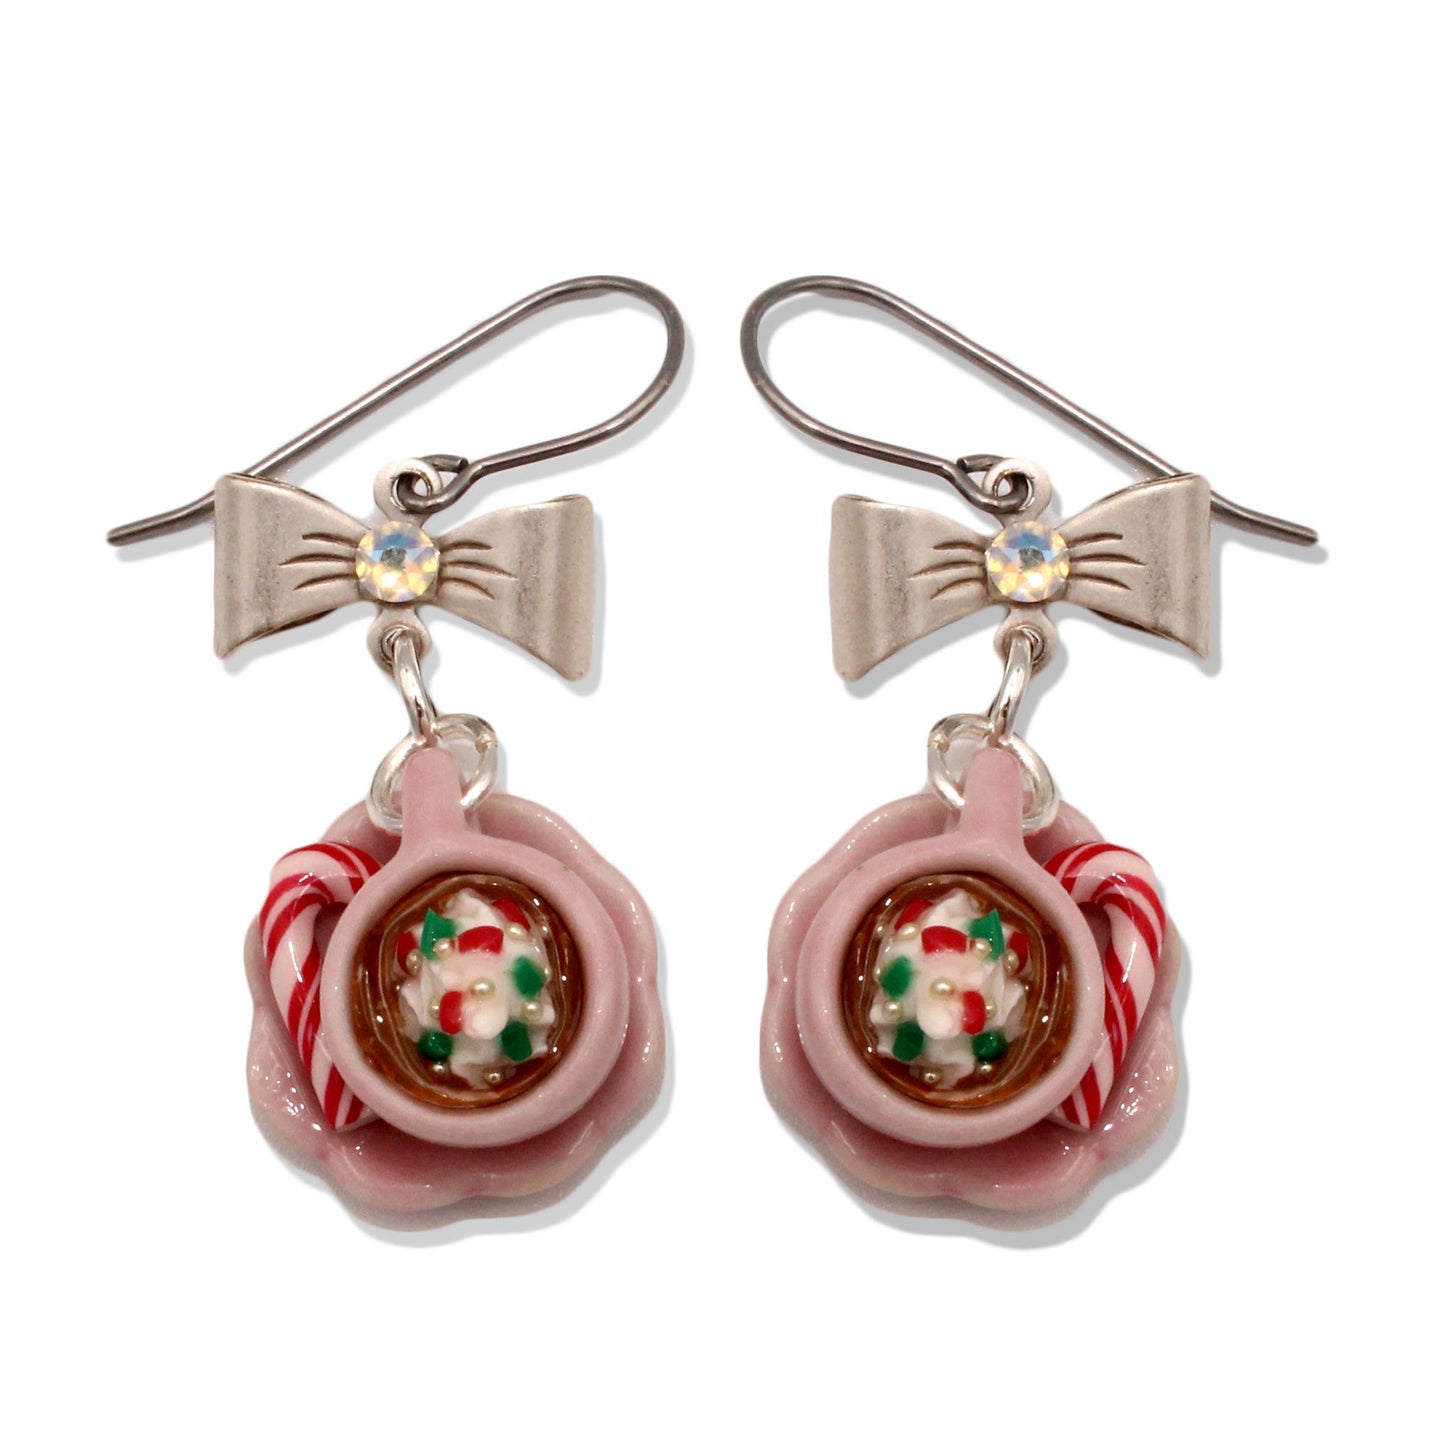 Hot Cocoa Earrings - Limited Edition Holiday Collection